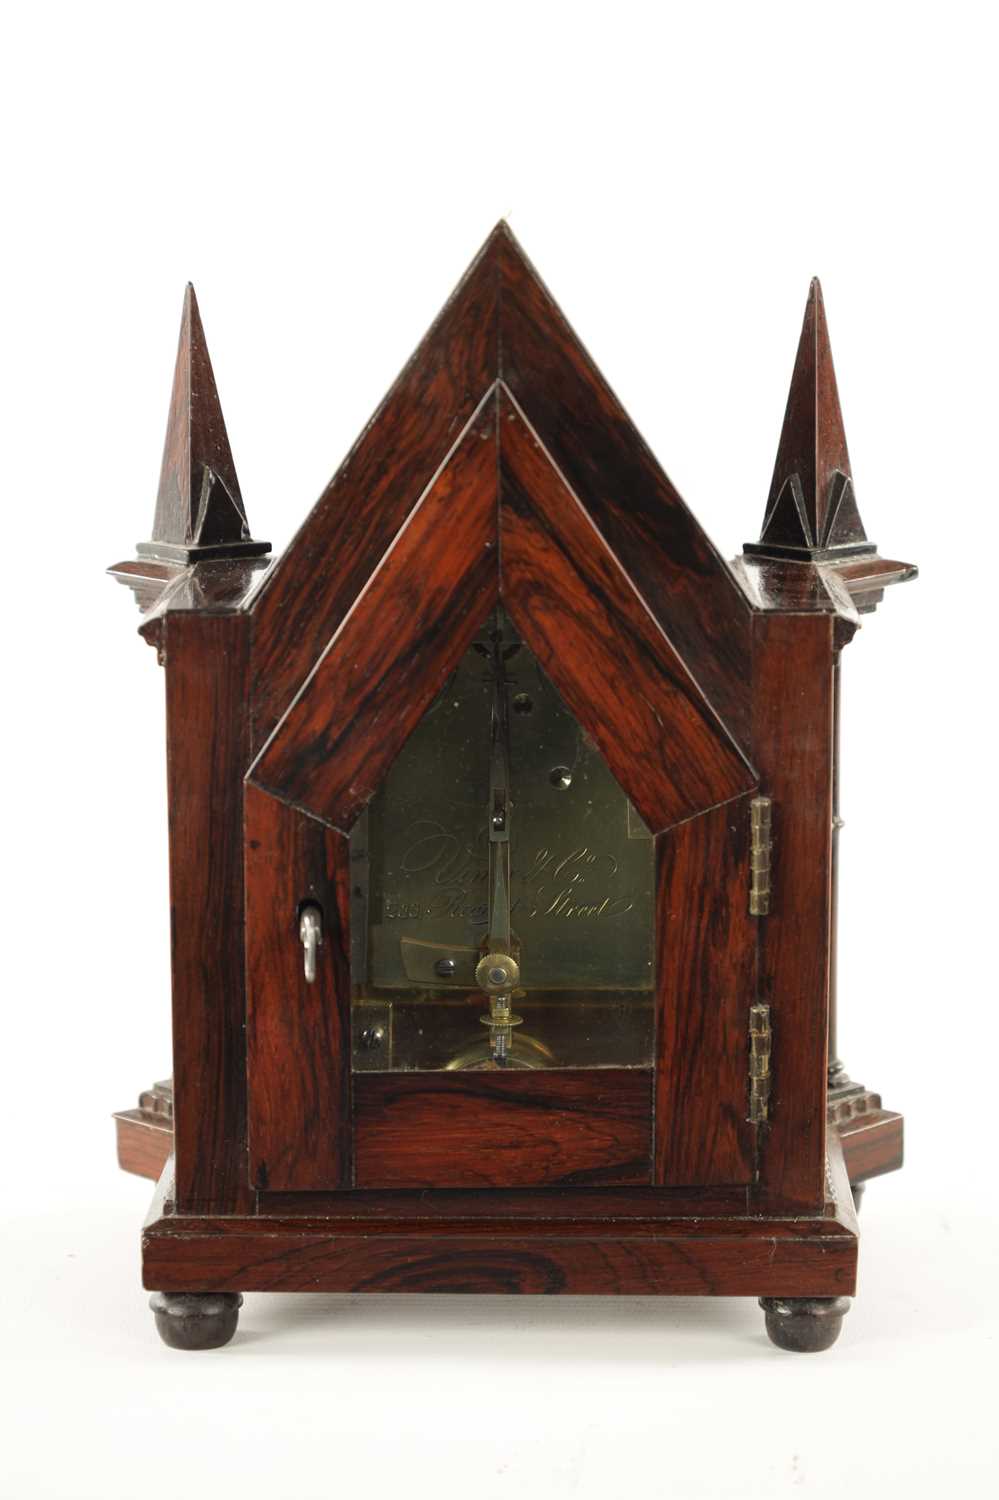 VINER, LONDON. A SMALL LATE REGENCY ENGLISH ROSEWOOD FUSEE MANTEL CLOCK - Image 6 of 11